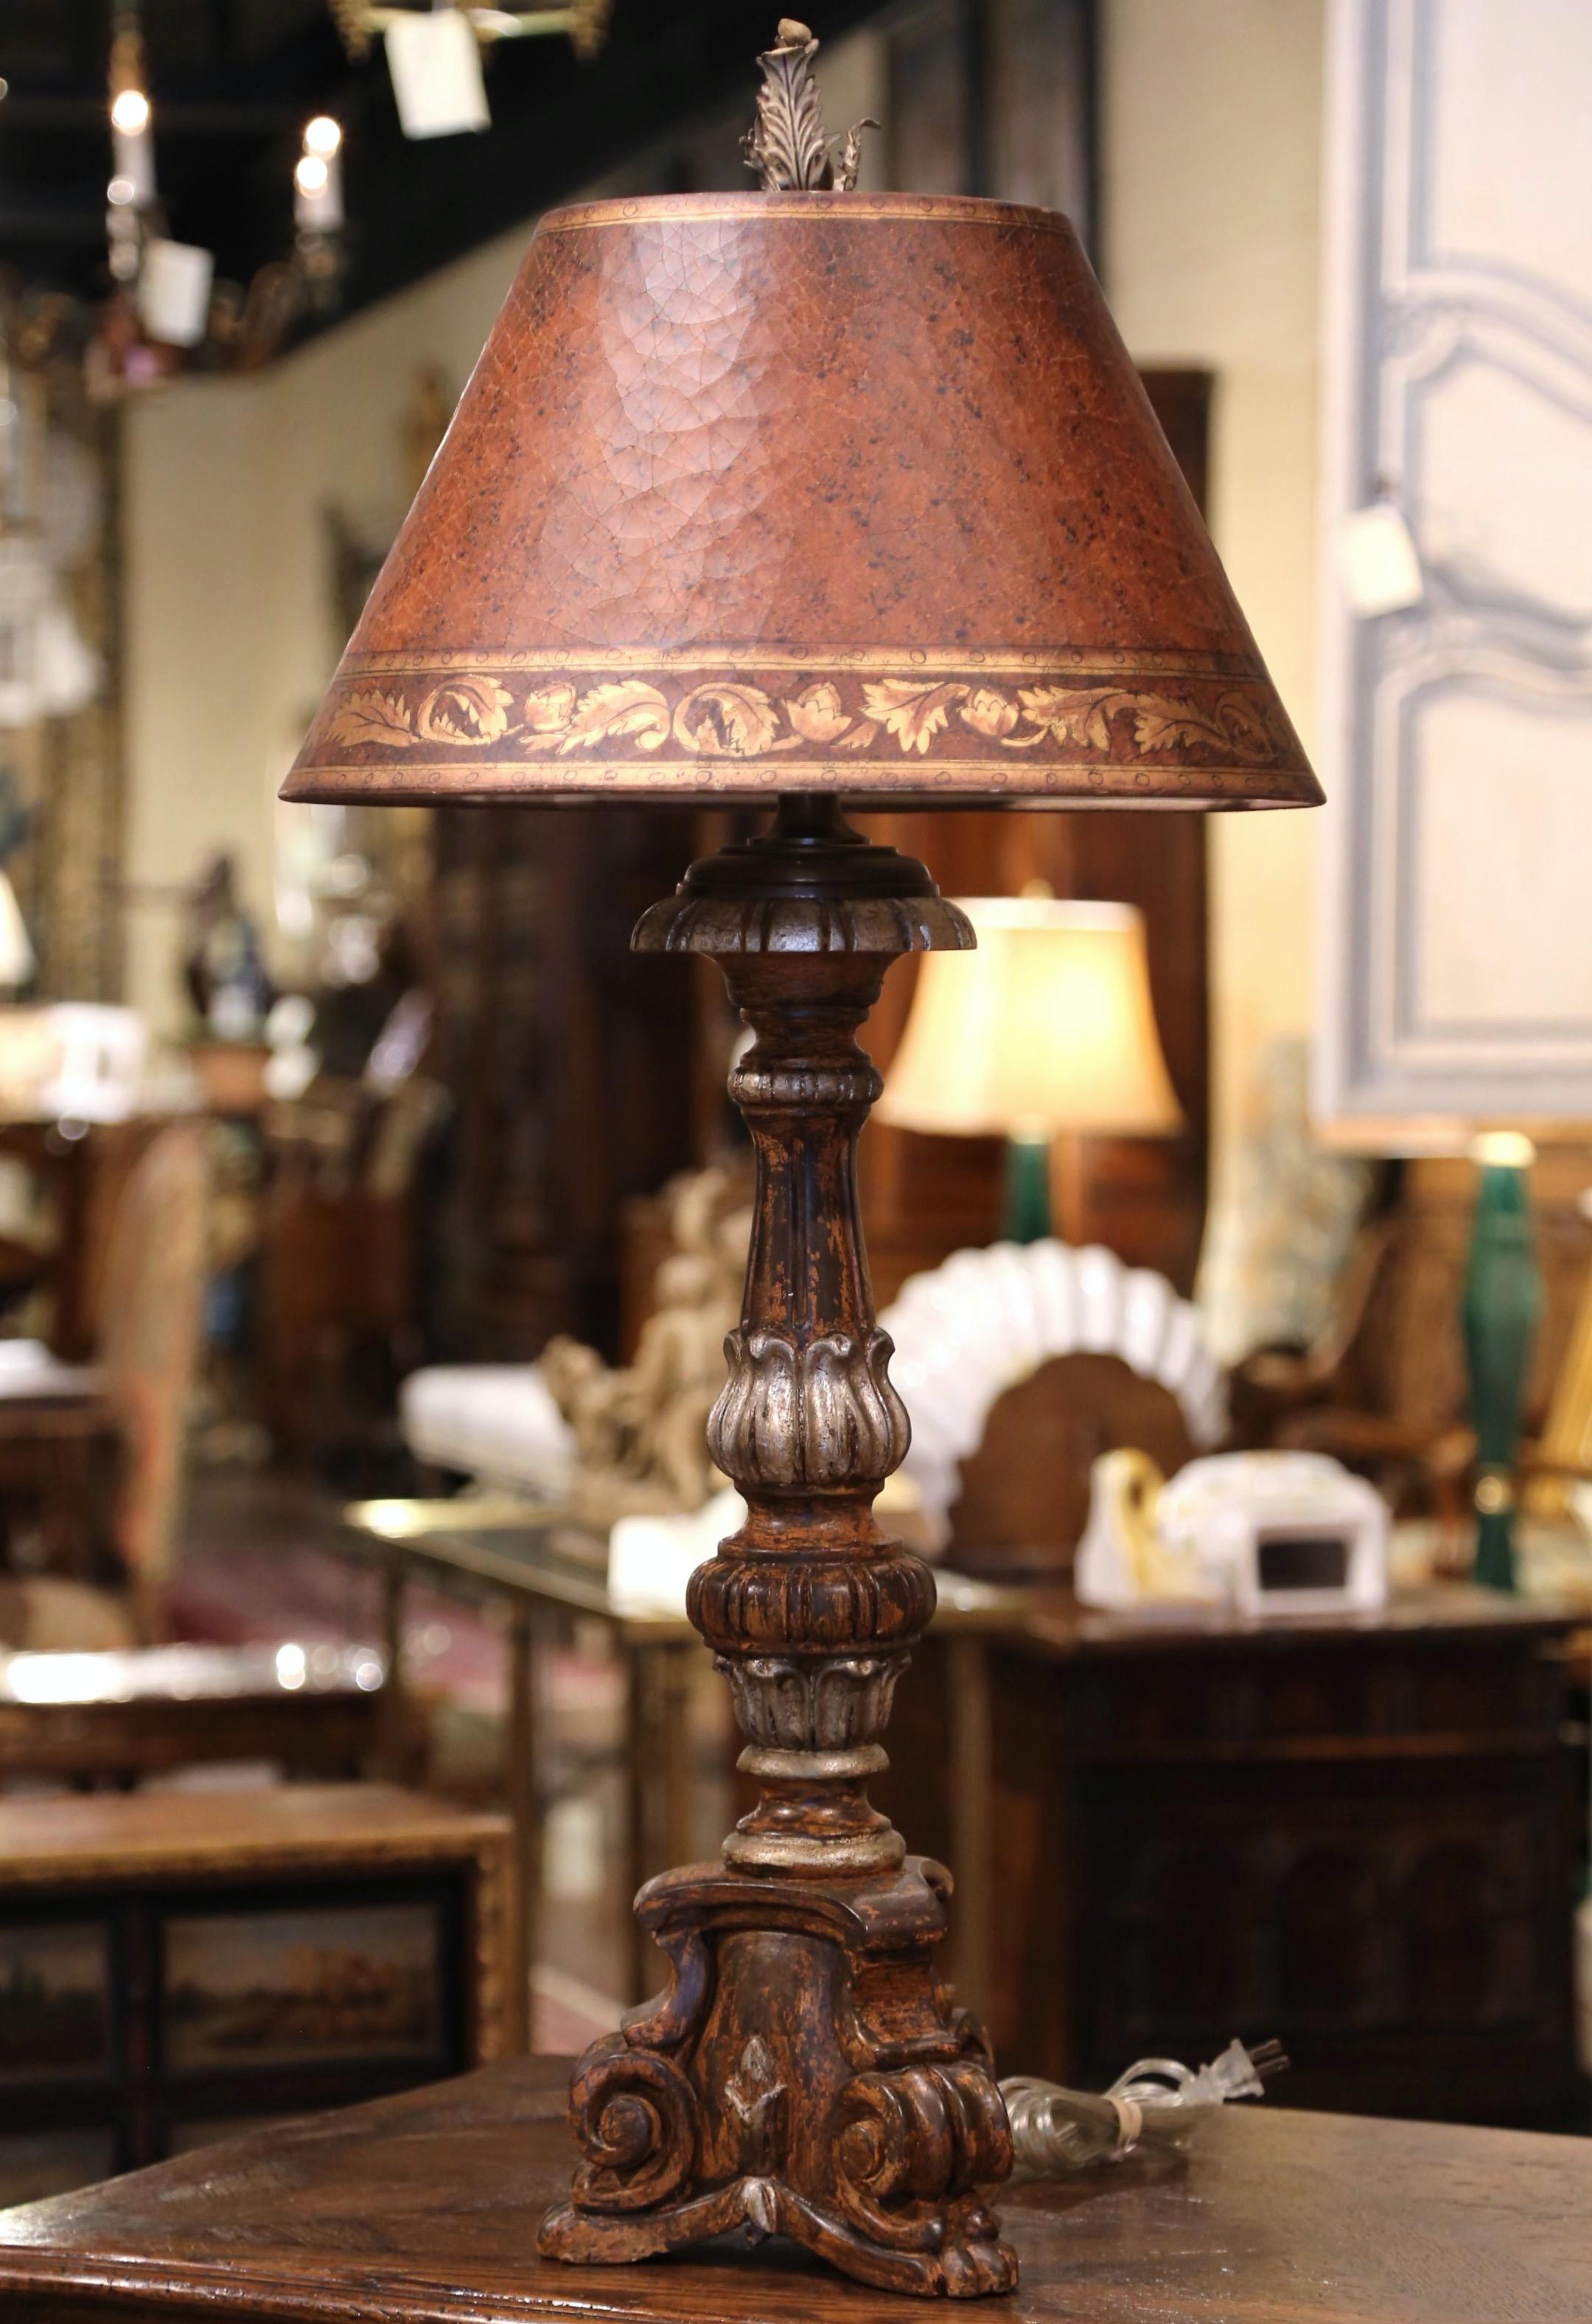 Created in Italy circa 1980, the elegant candlestick stands on scrolled feet over a triangle base decorated with shell decor. The tall carved stem has been fitted into a table lamp with new wiring and is embellished with a brown painted parchment